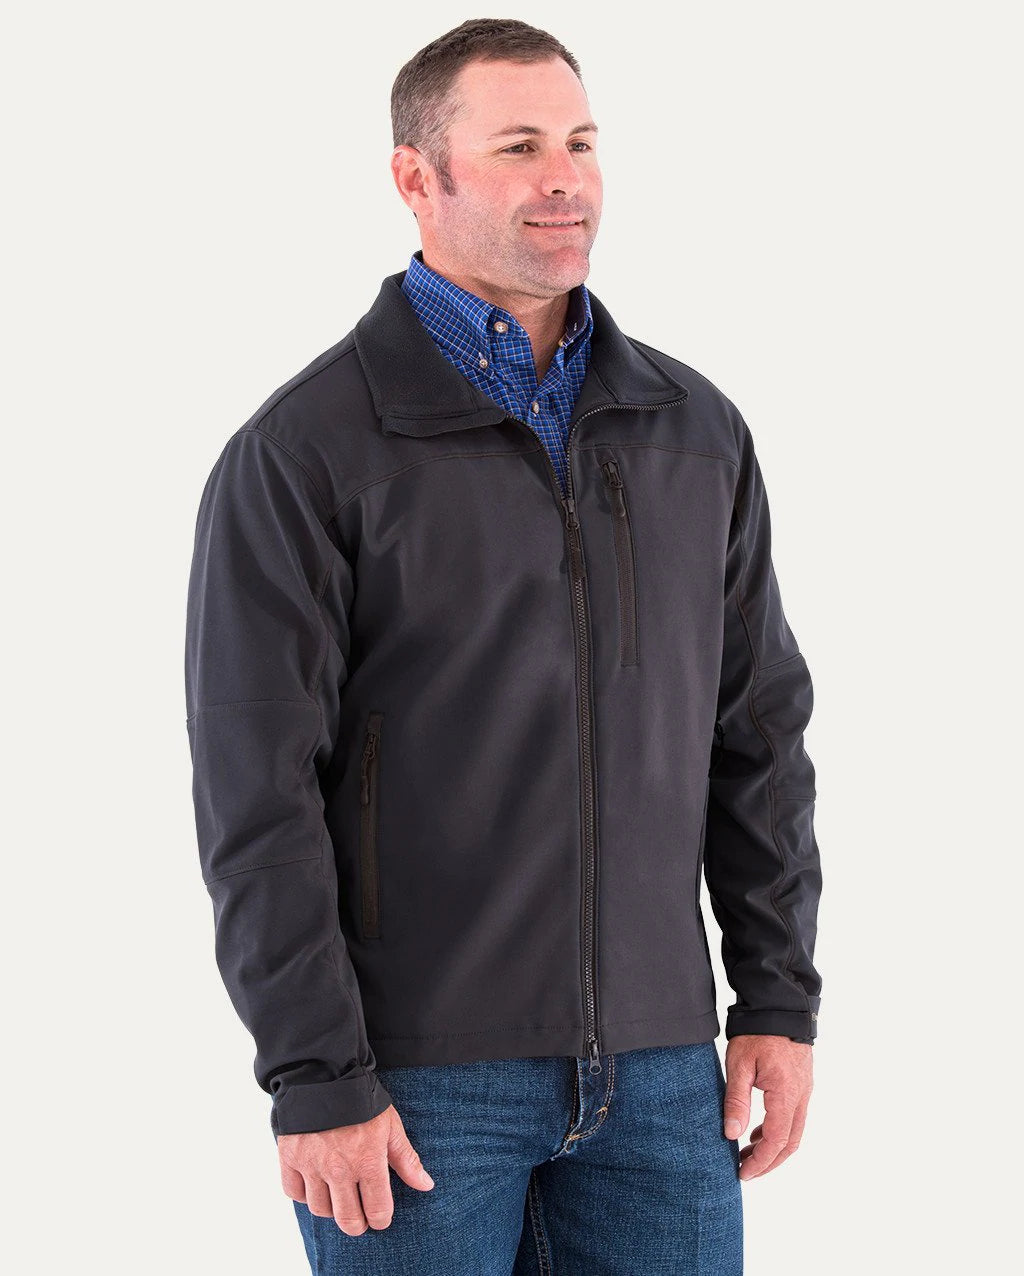 NOBLE MENS ALL ROUND JACKET